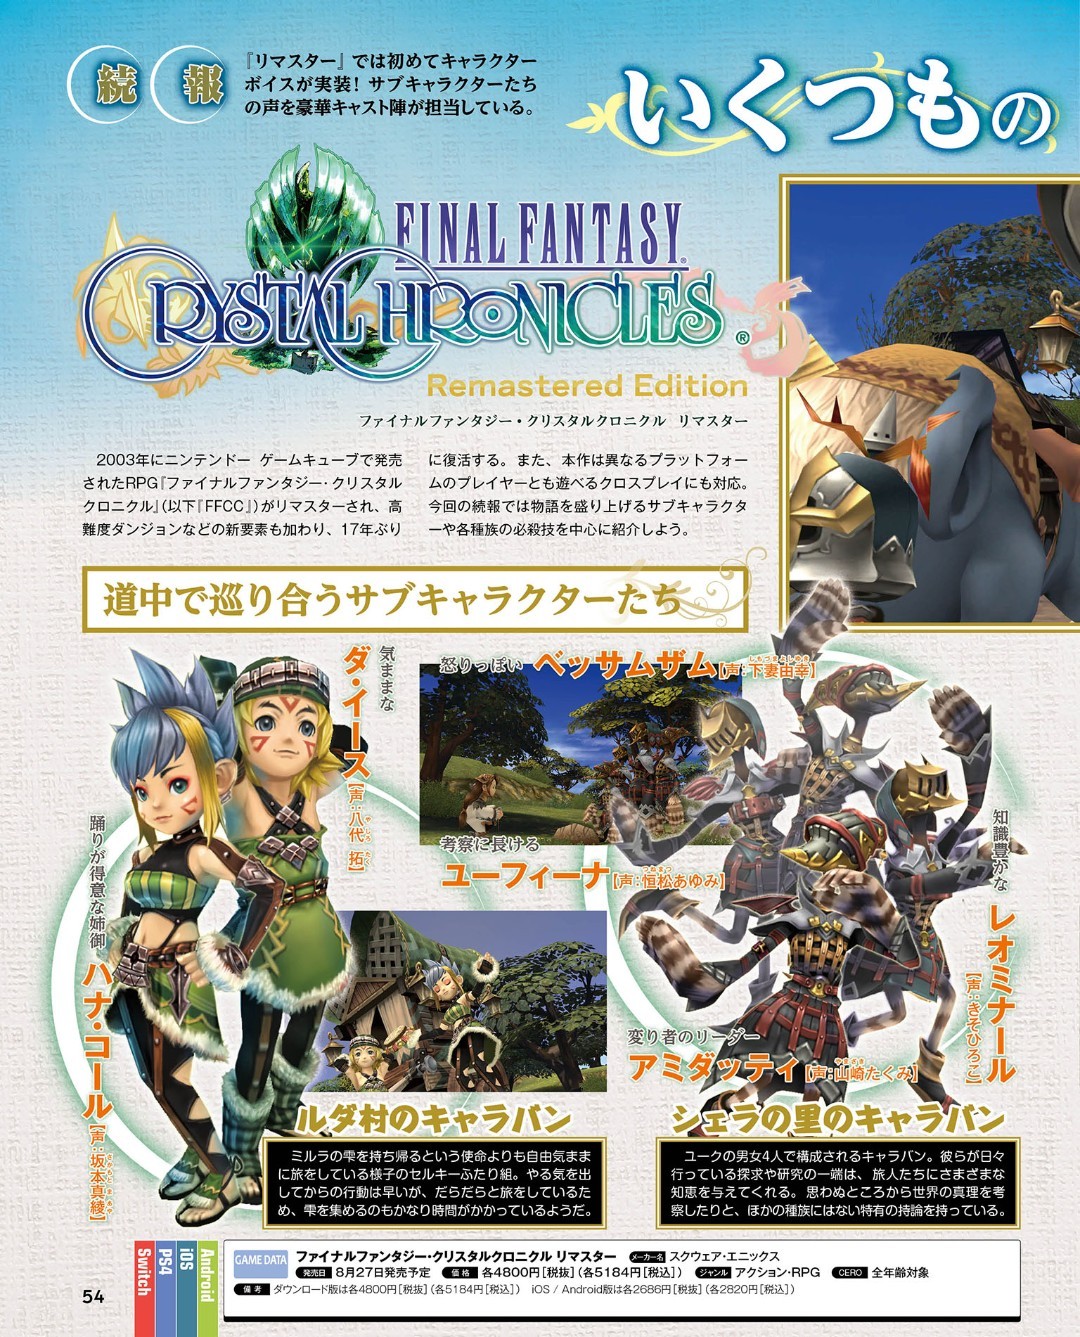 Final Fantasy Crystal Chronicles Remastered Edition - PS4 NSW Bilder